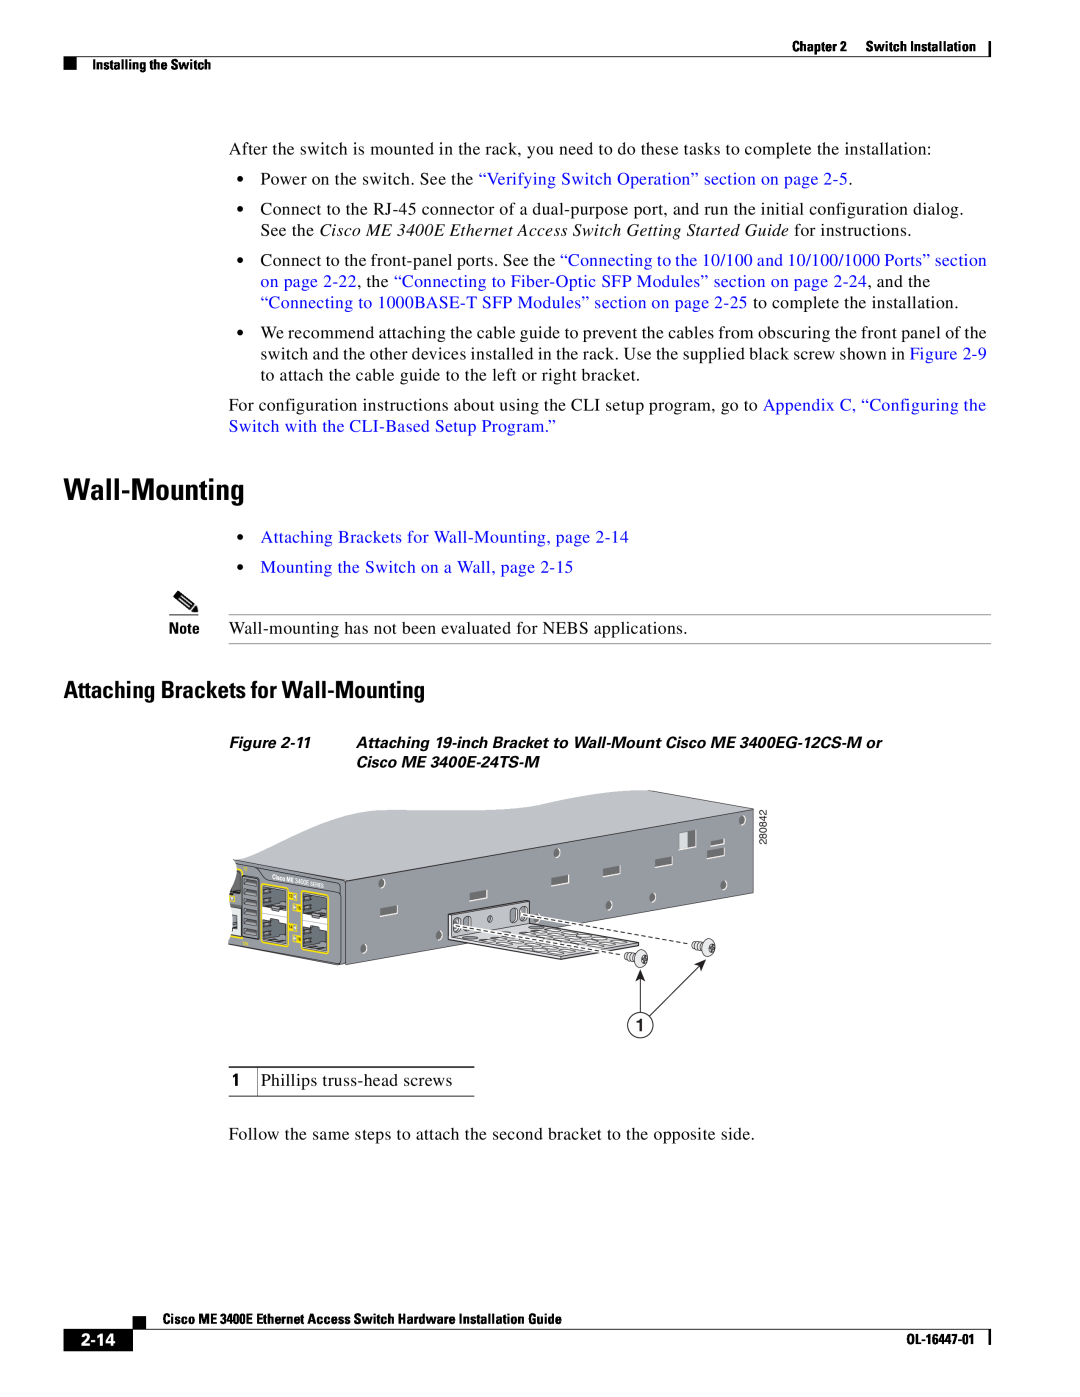 Cisco Systems OL-16447-01 Attaching Brackets for Wall-Mounting, page, Mounting the Switch on a Wall, page, 2-14 